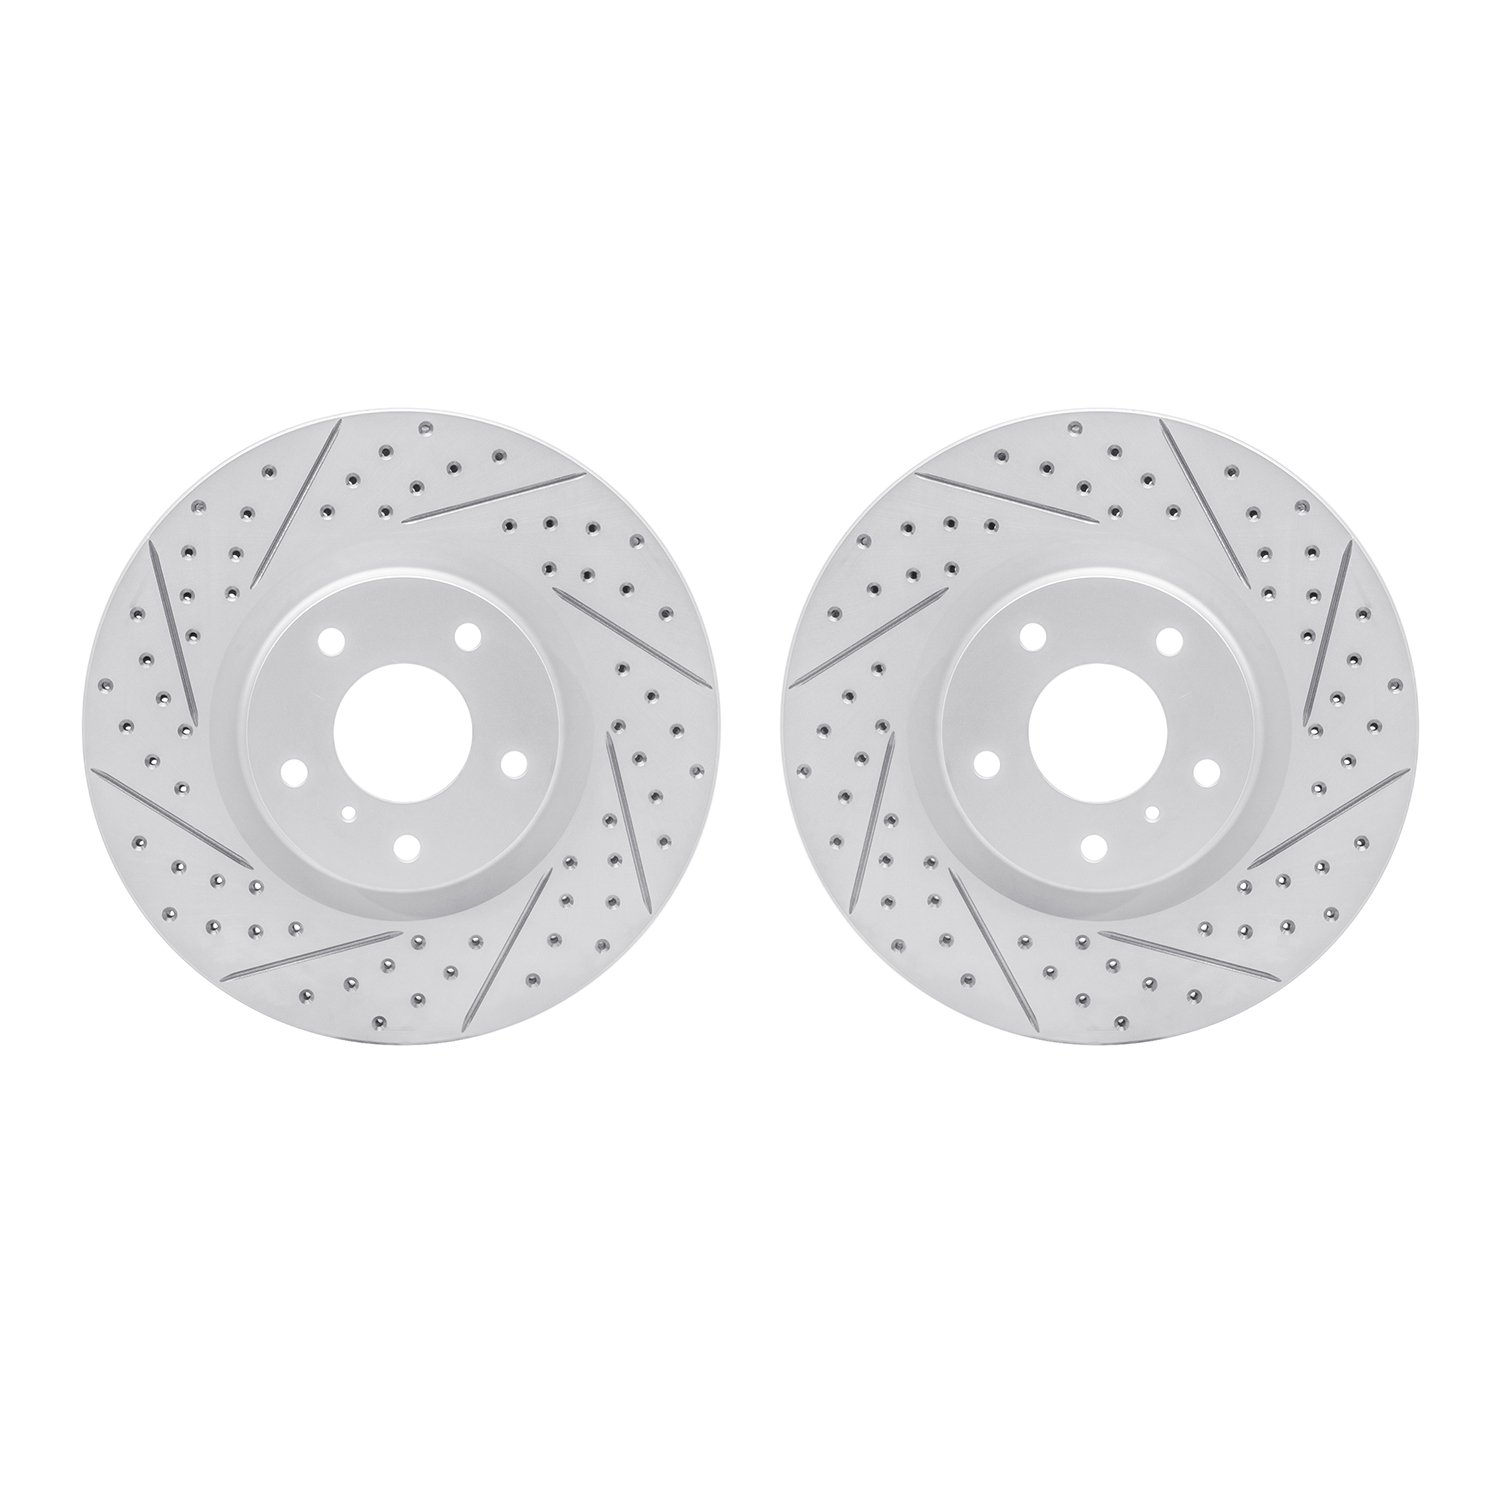 2002-67001 Geoperformance Drilled/Slotted Brake Rotors, Fits Select Infiniti/Nissan, Position: Front